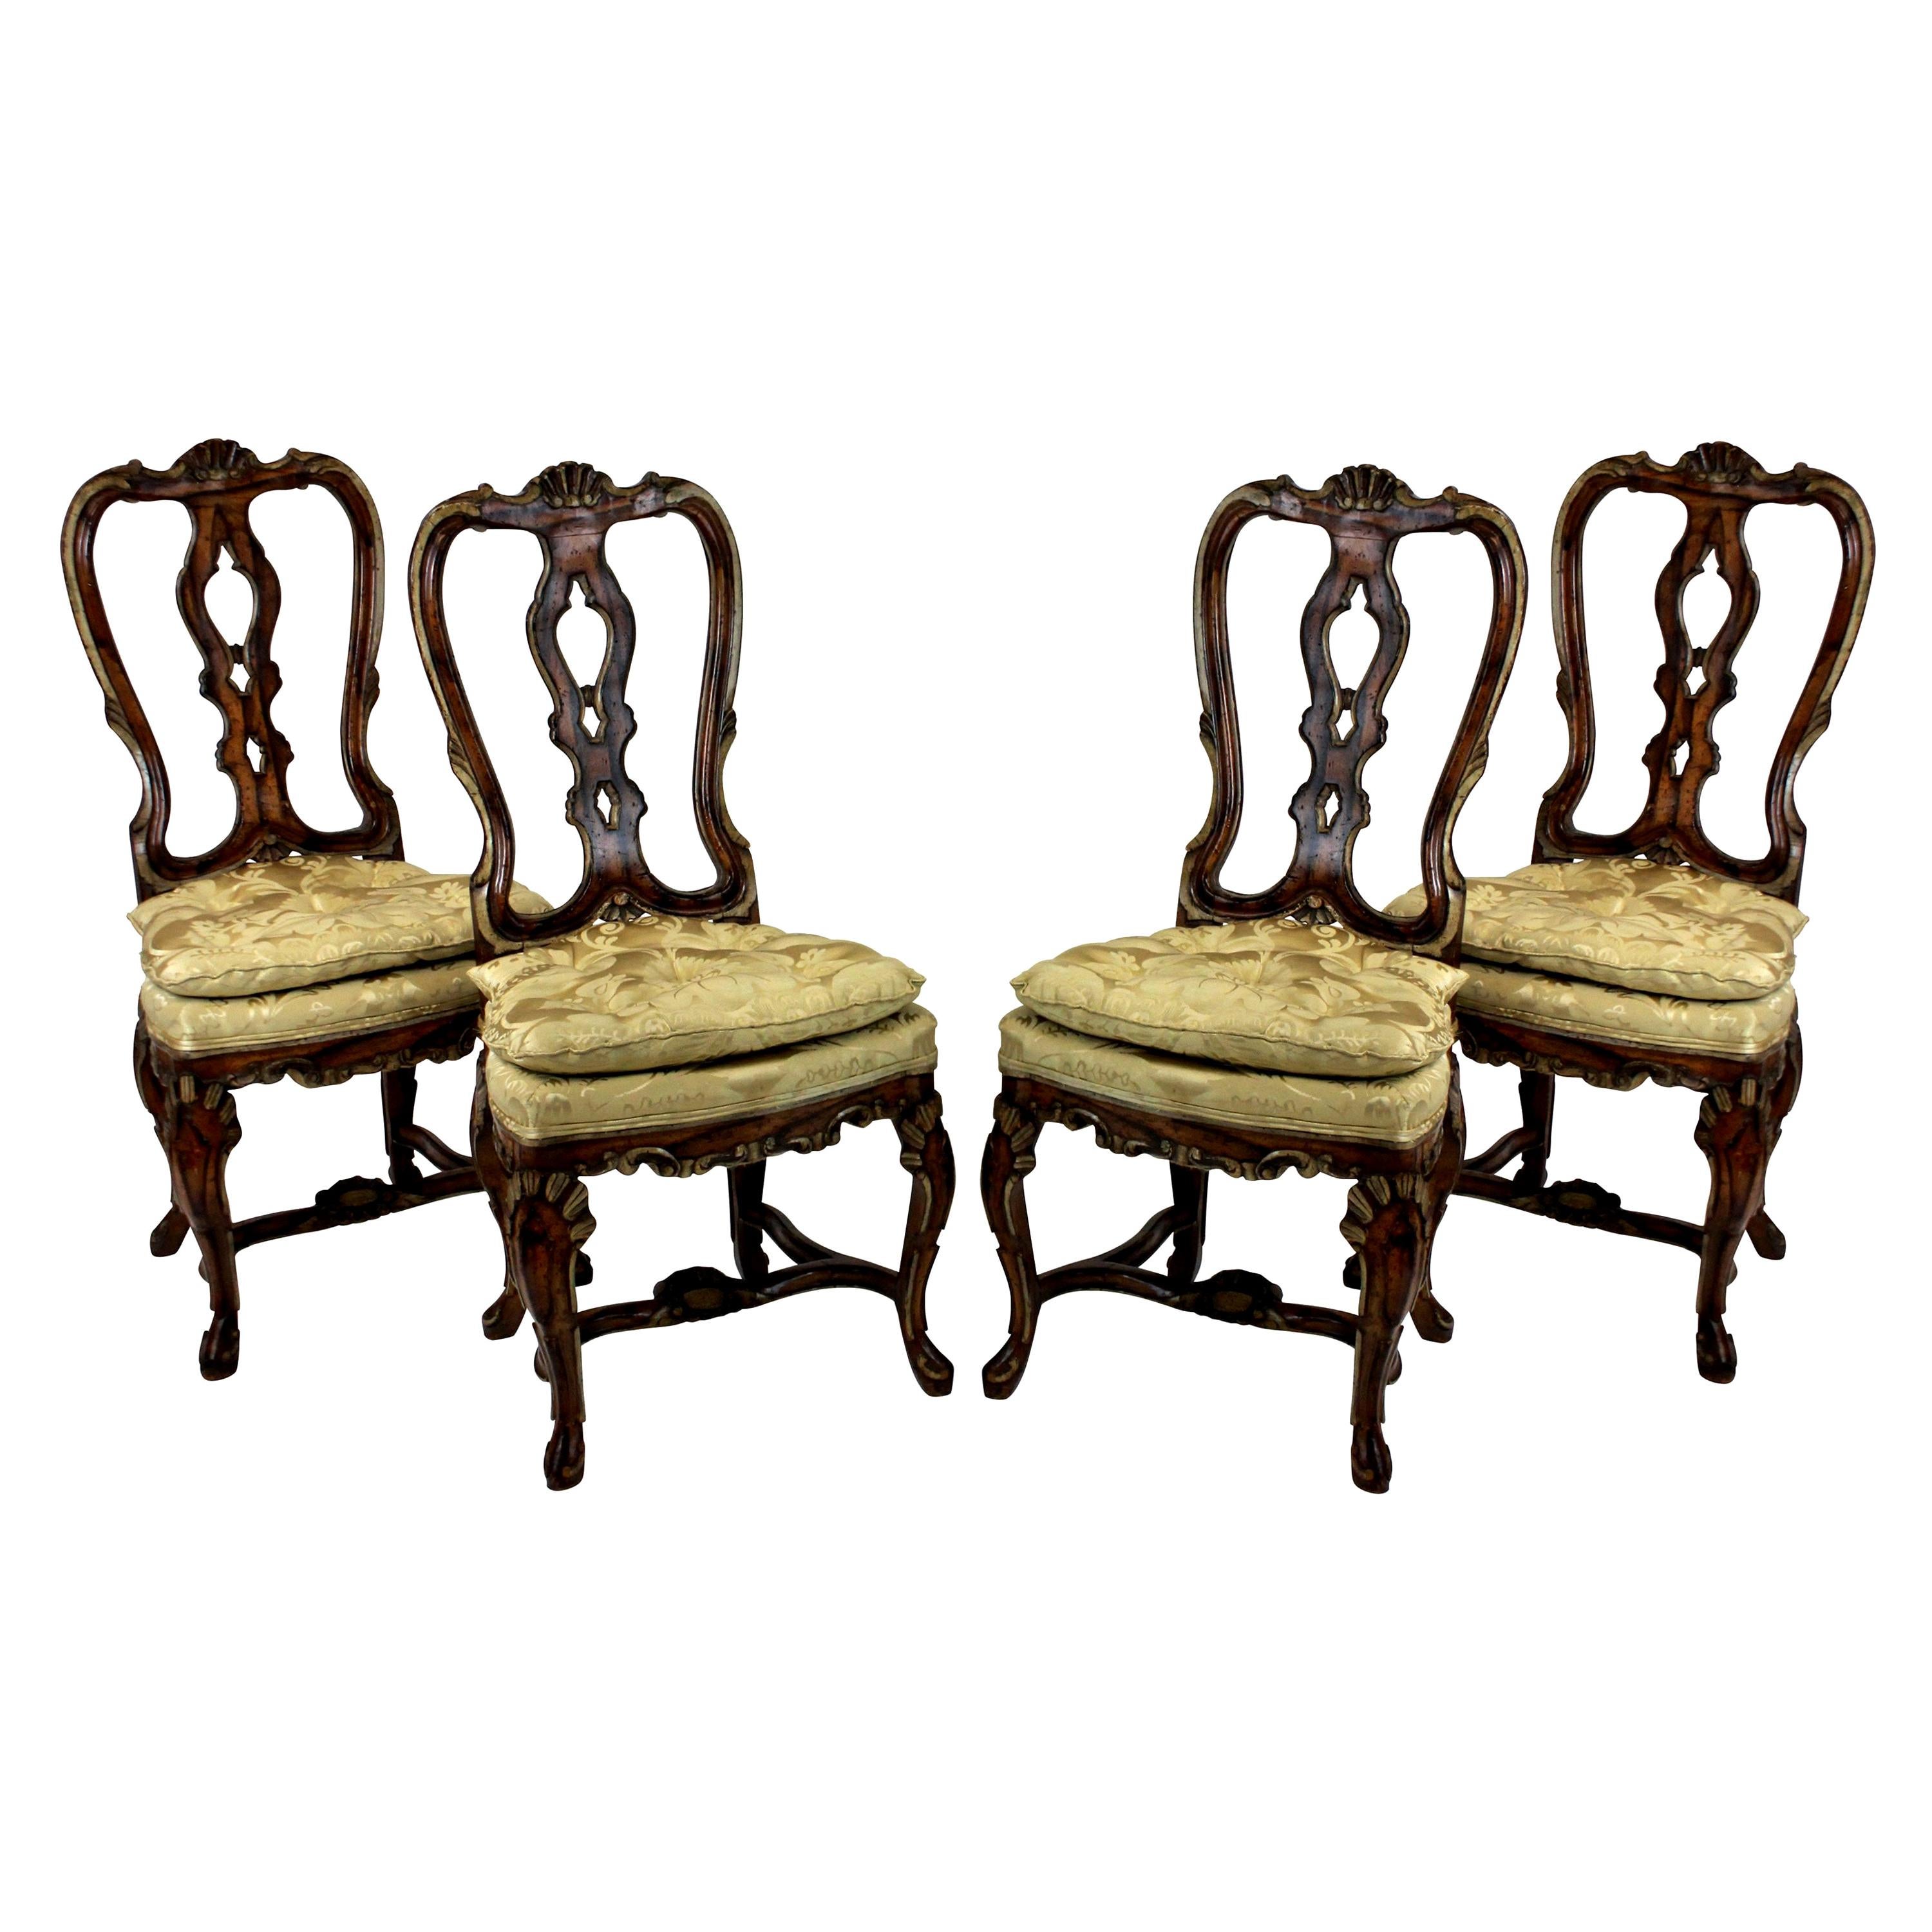 Set of Four Fine George II Faux Walnut and Gilded Dining Chairs